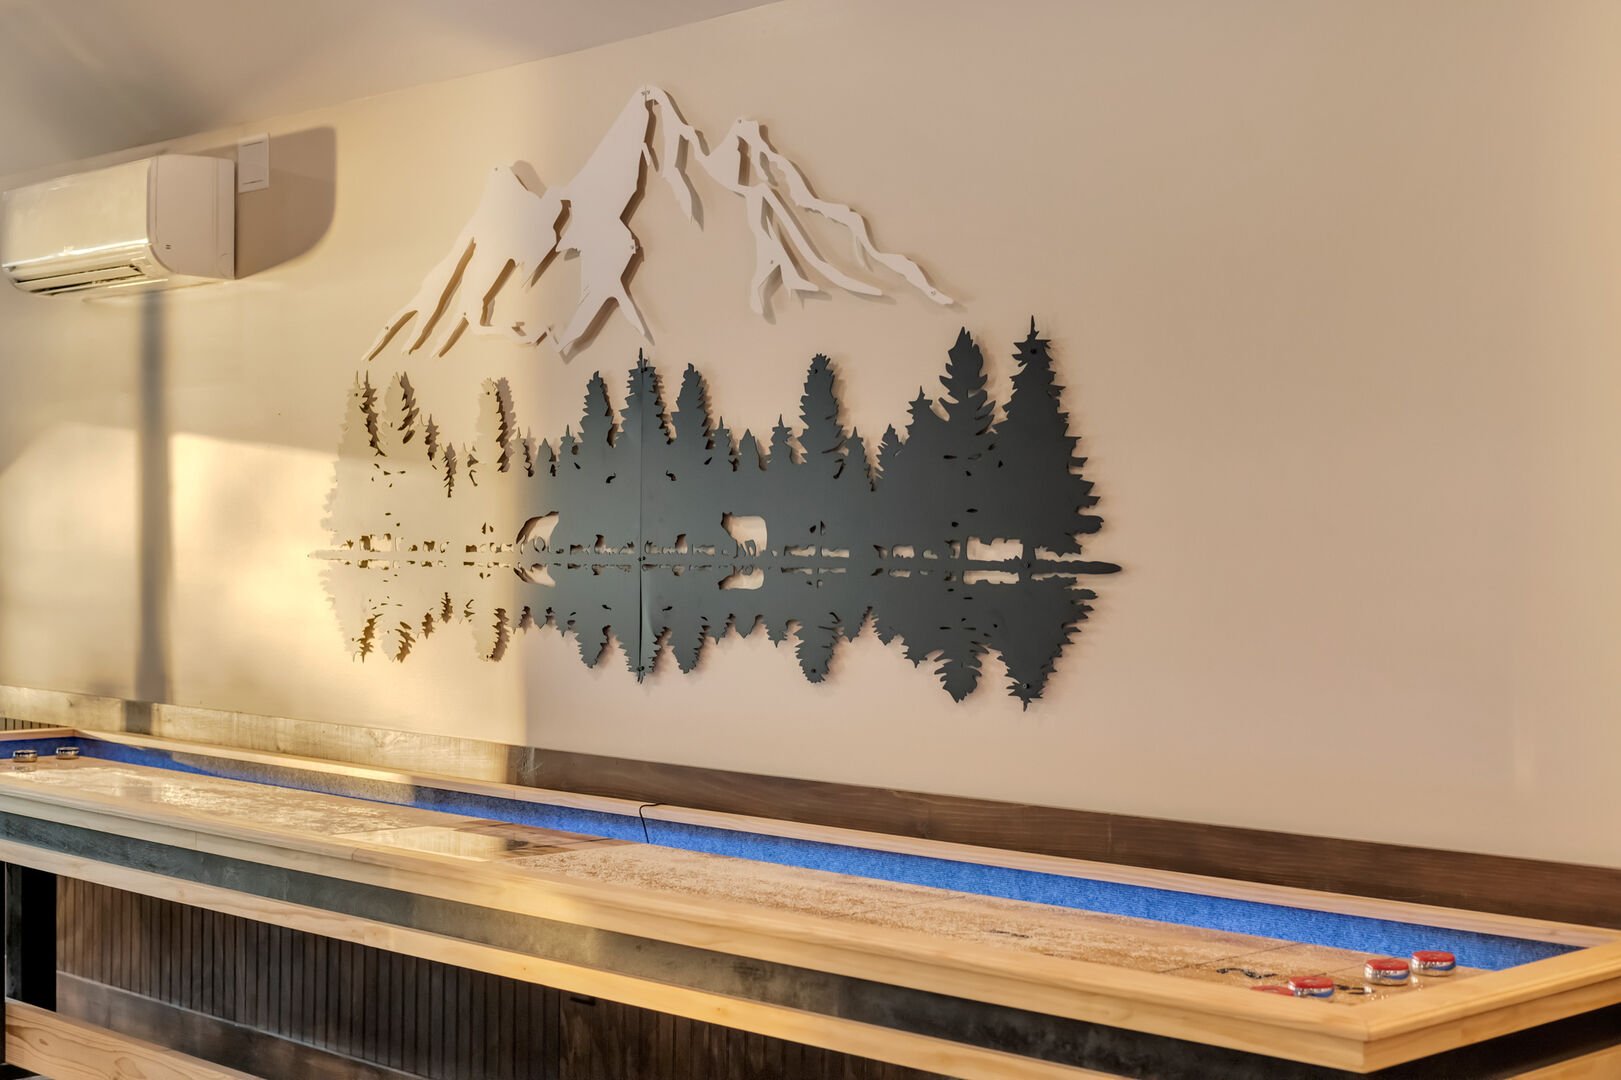 Best of Both Worlds!
This Game Room Artwork perfectly depicts Lake Life in The Mountains.